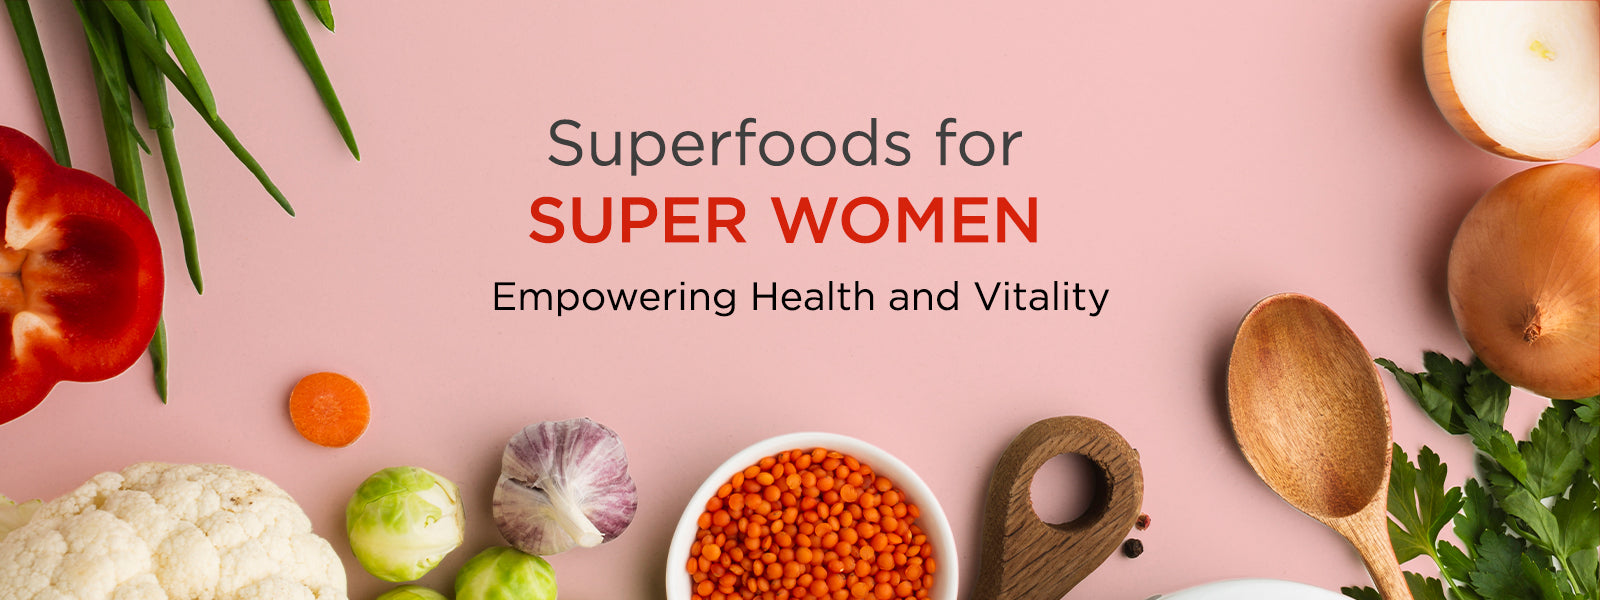 Superfoods for Super Women: Empowering Health and Vitality